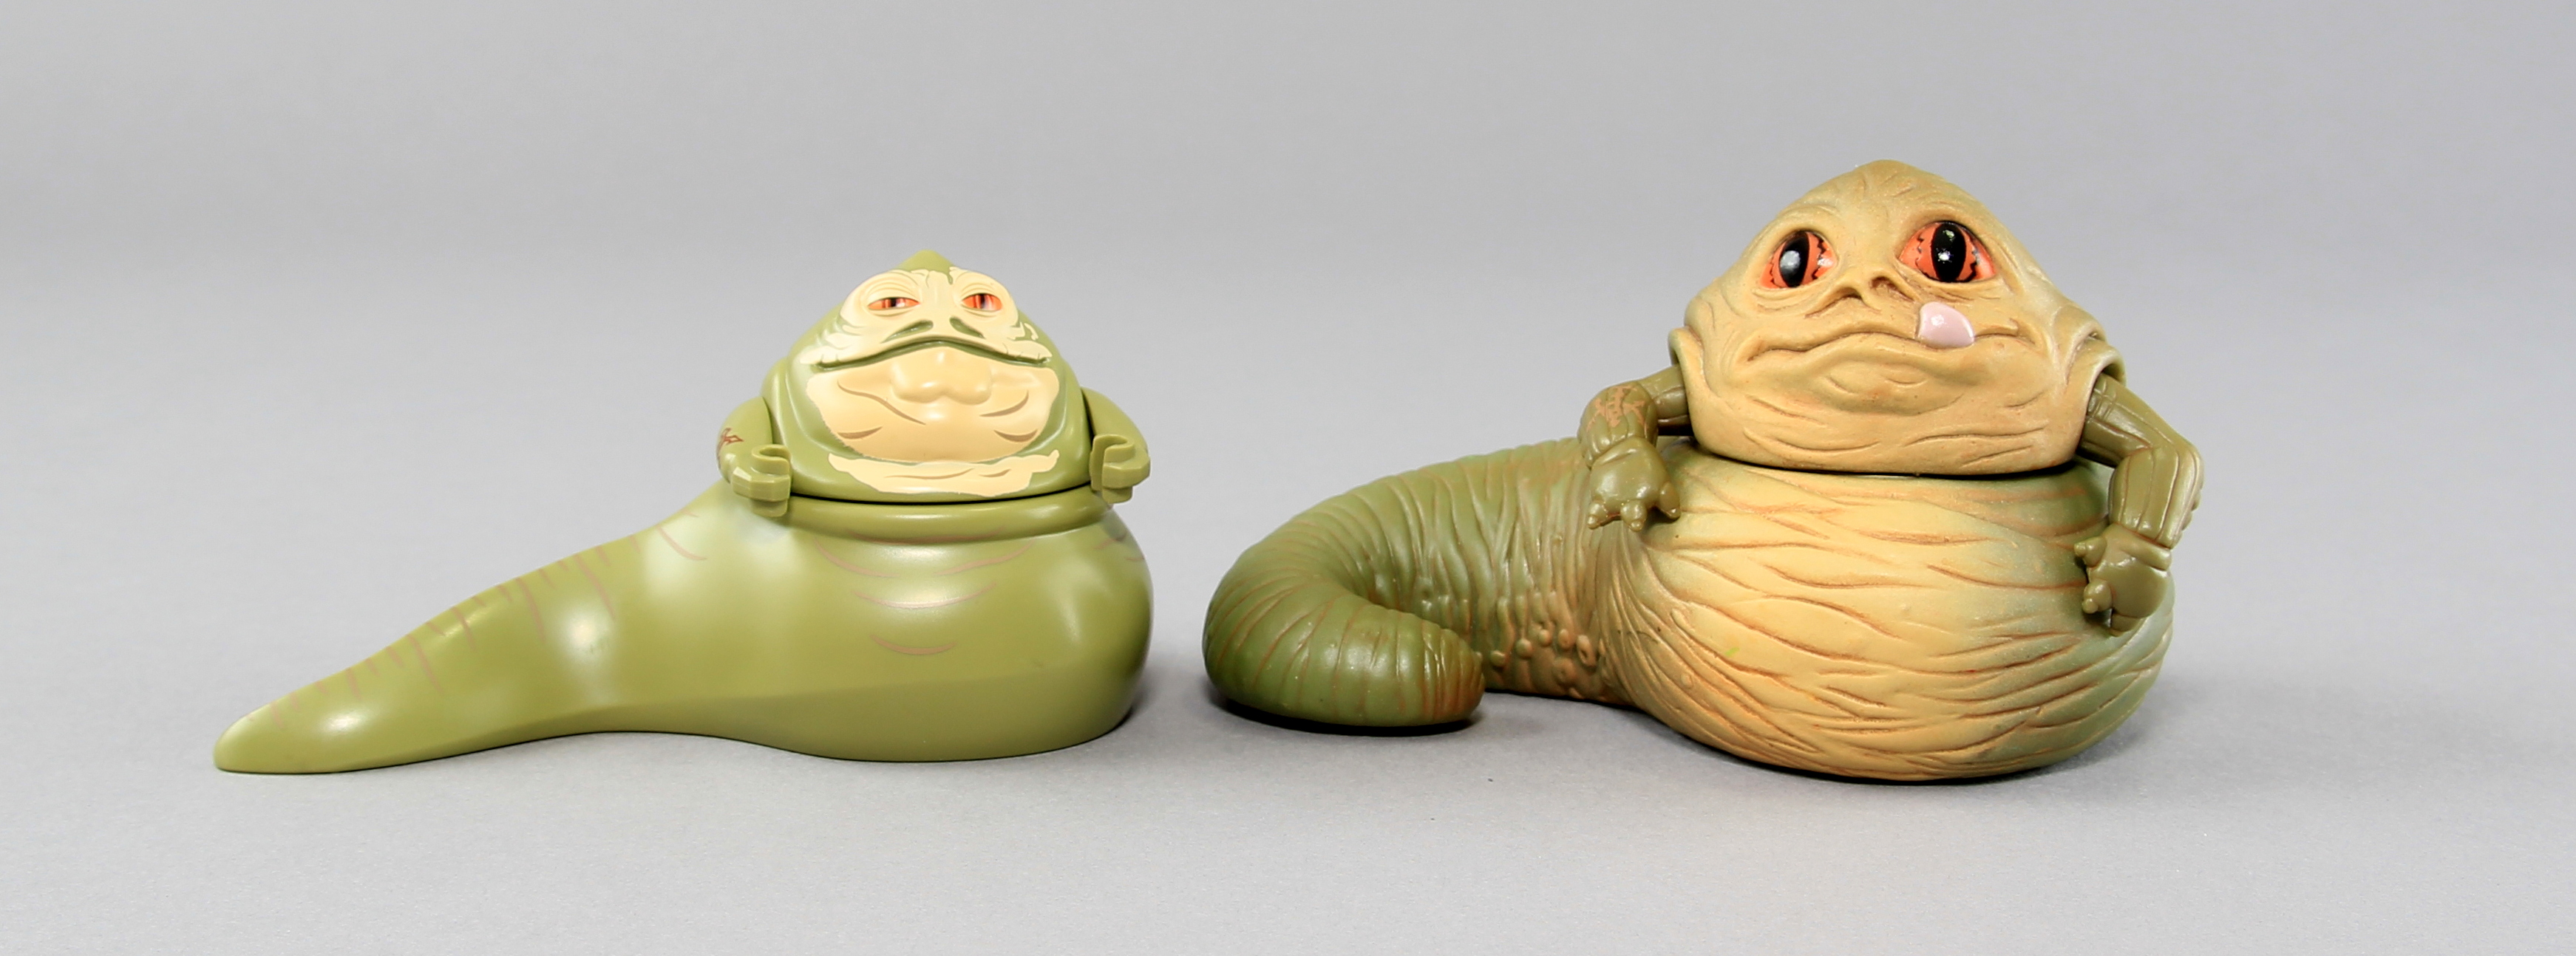 Now take a look at the toy I believe influenced this new Jabba, at least in...